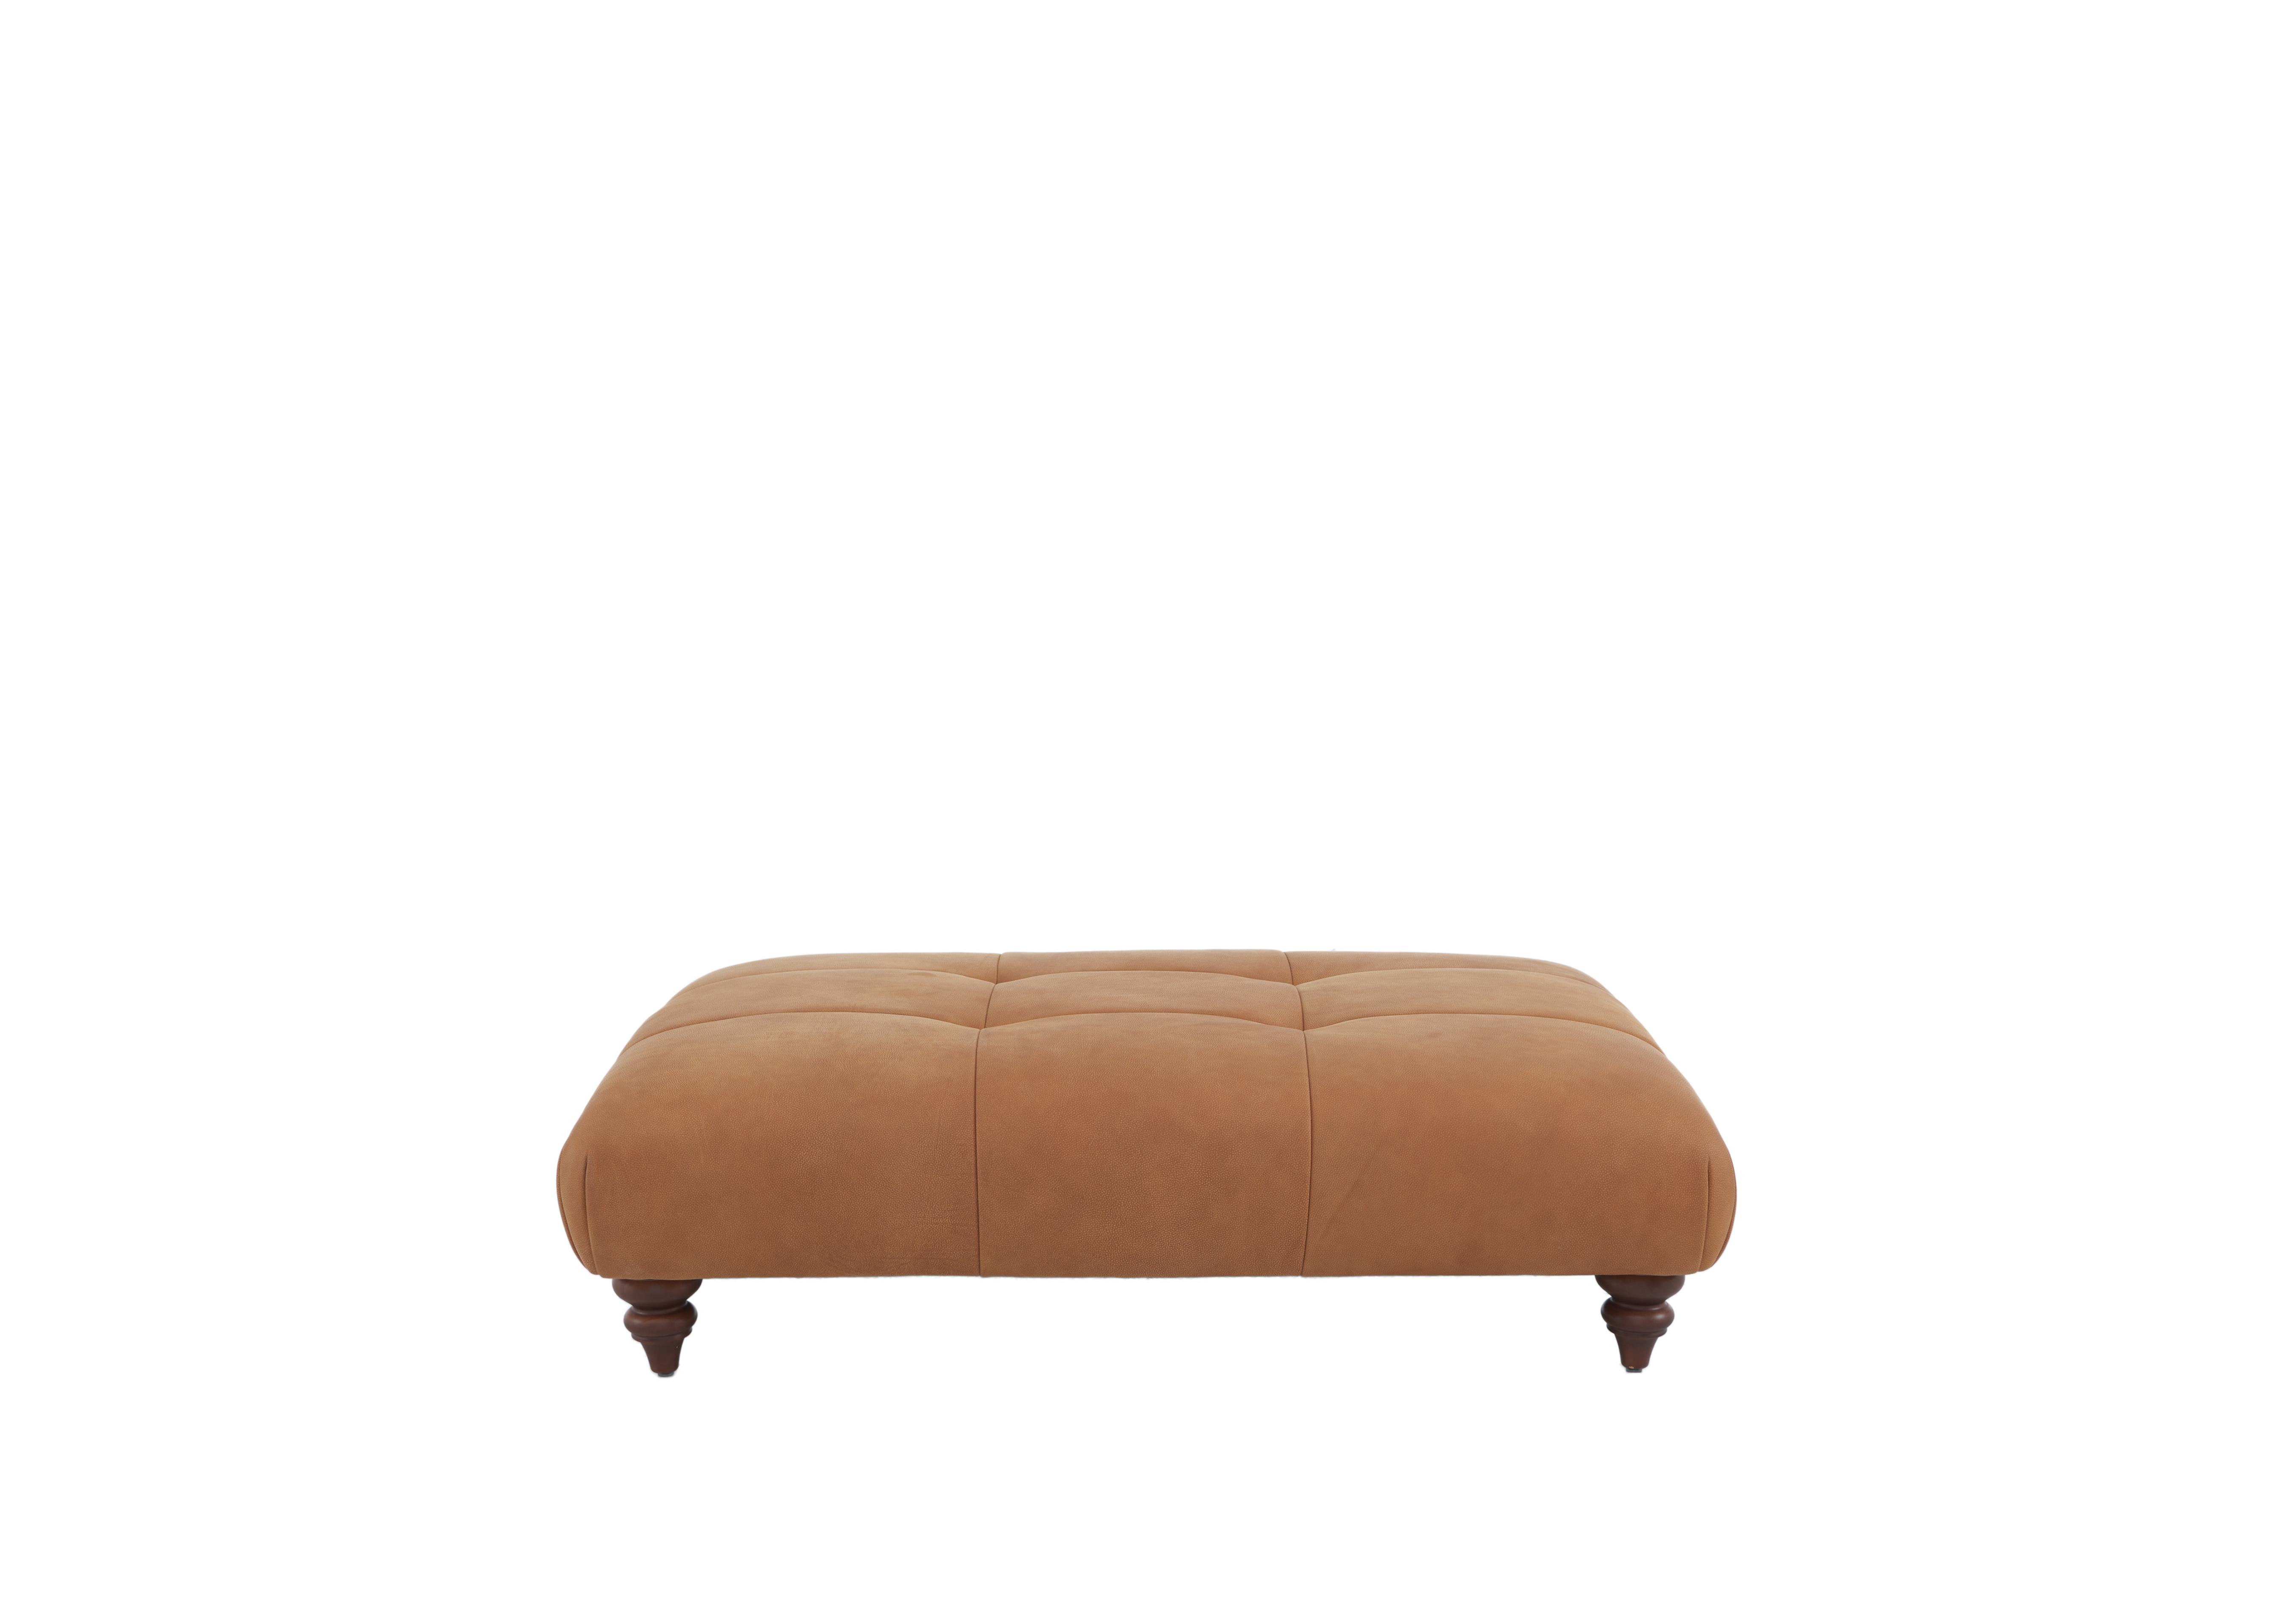 Boutique Brando Large Leather Footstool in Stone Washed Tan on Furniture Village